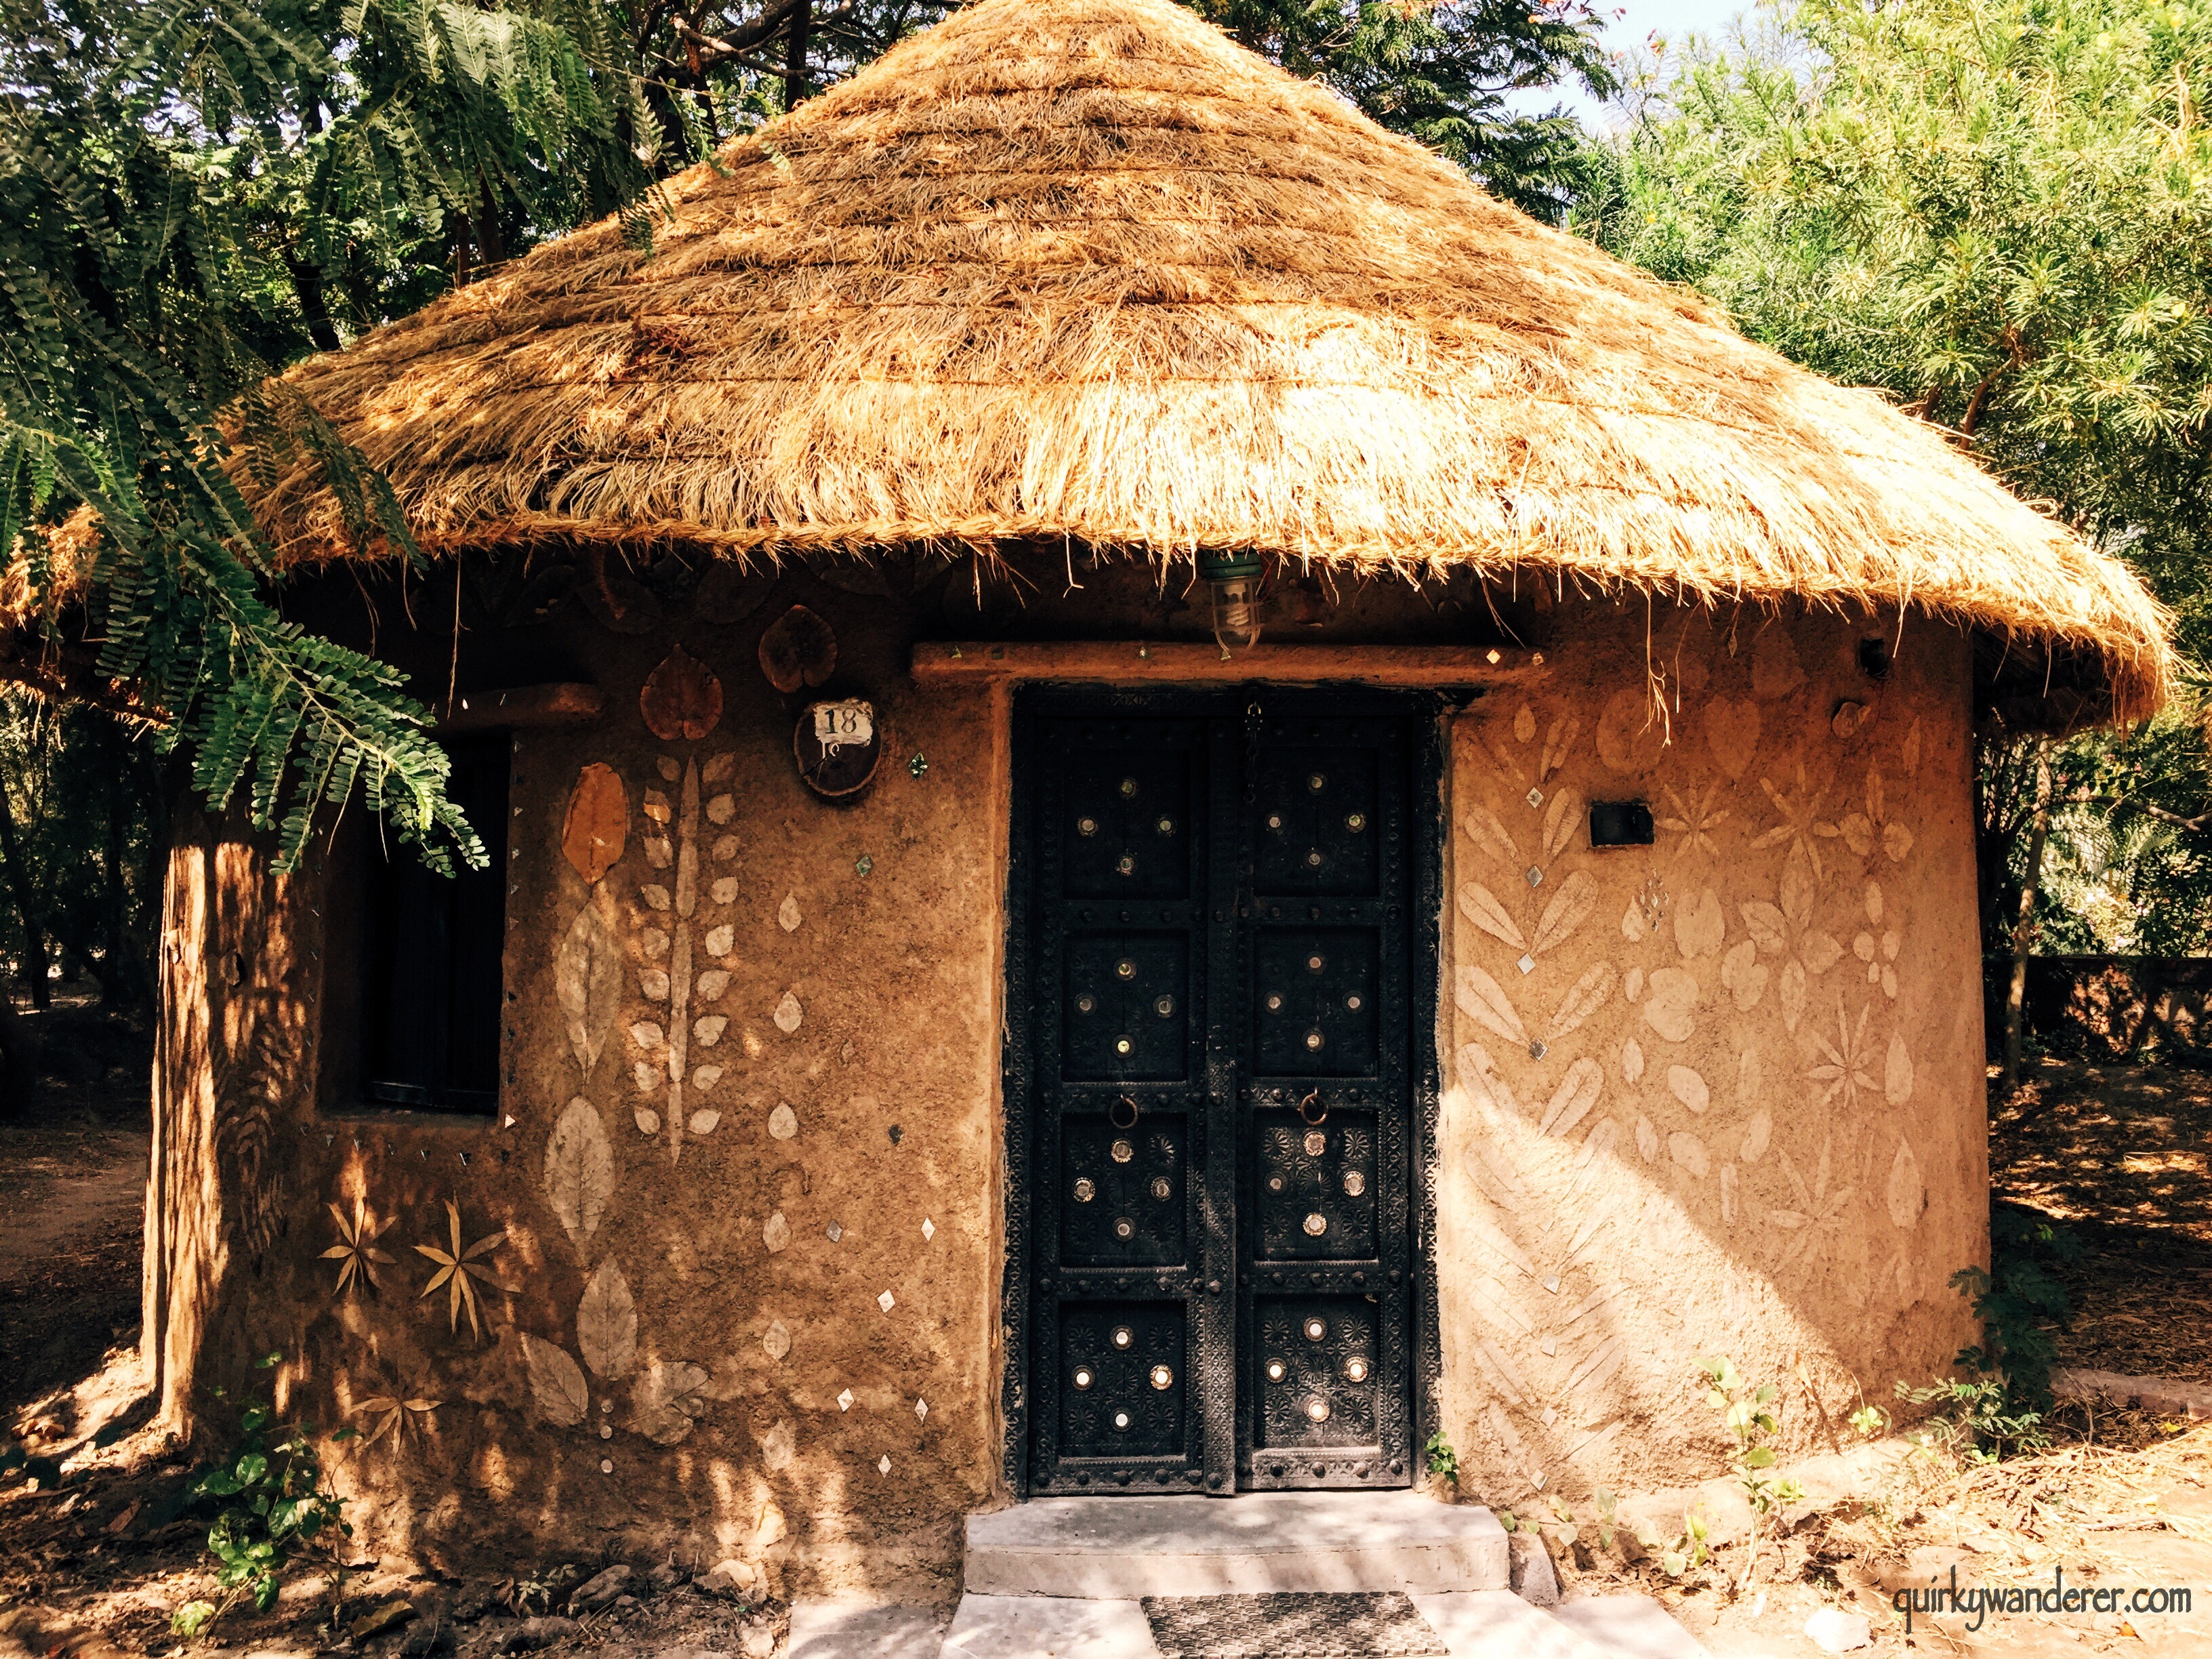 Where to stay in Little Rann of Kutch